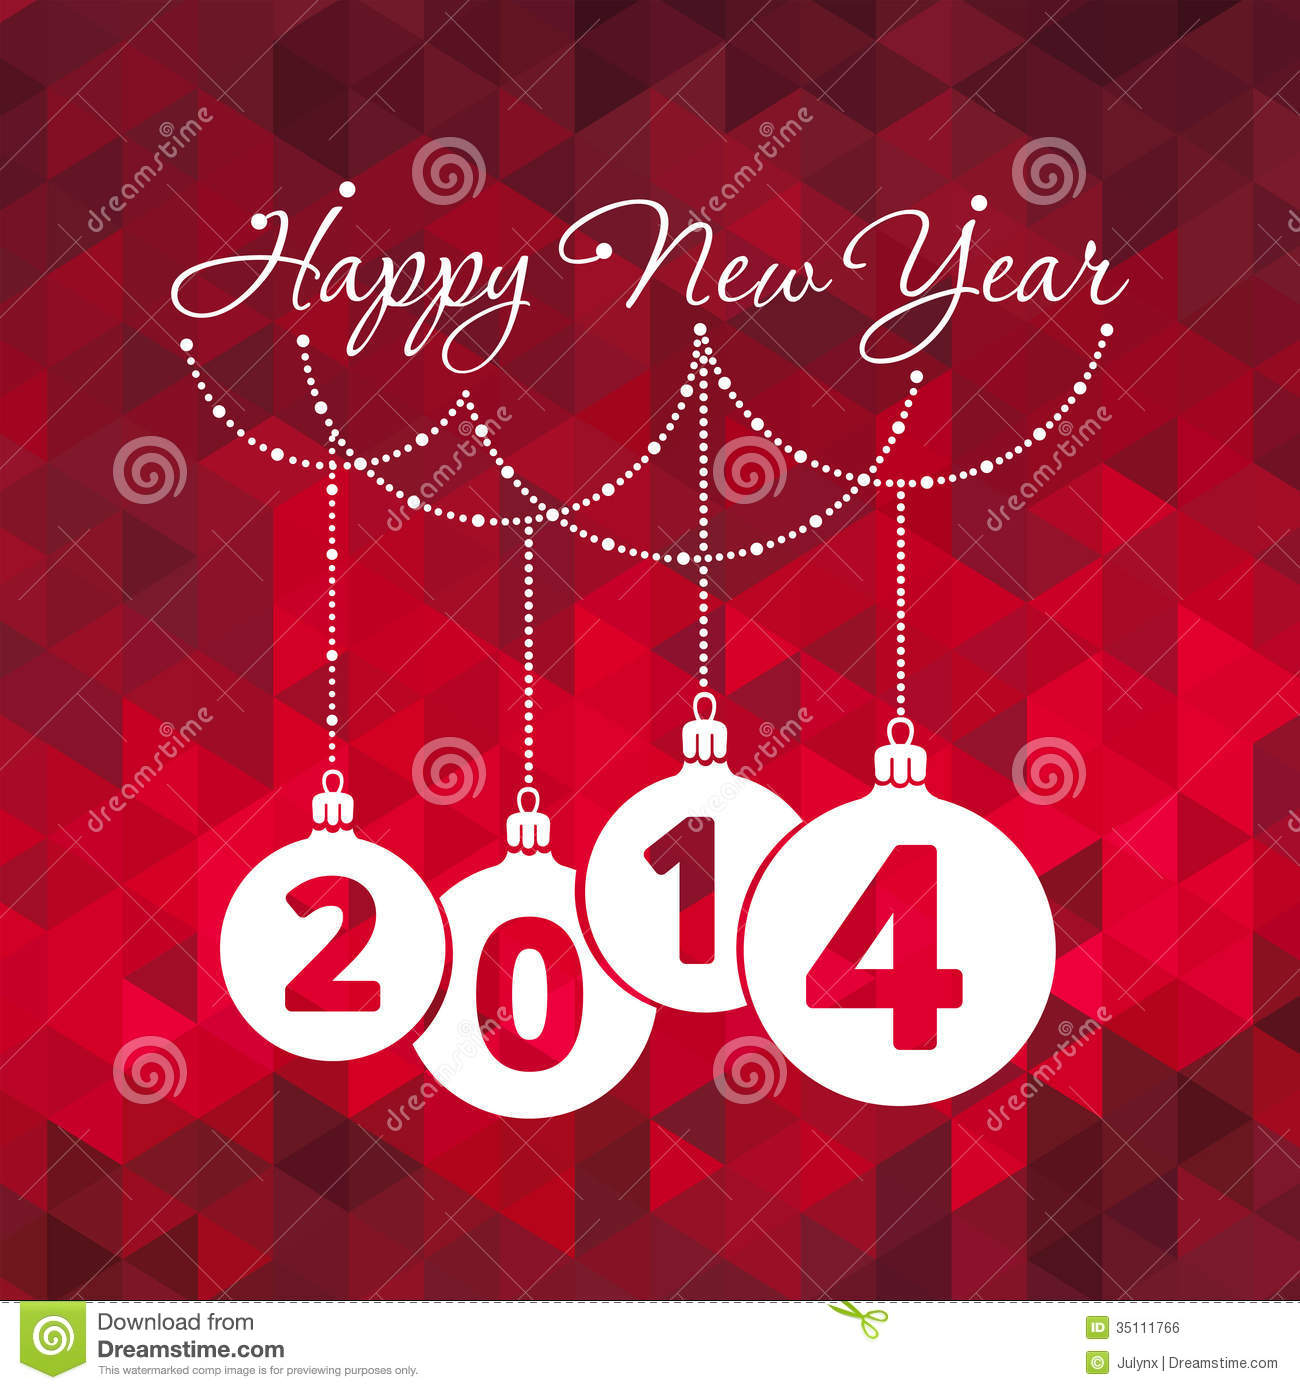 a happy new year card image